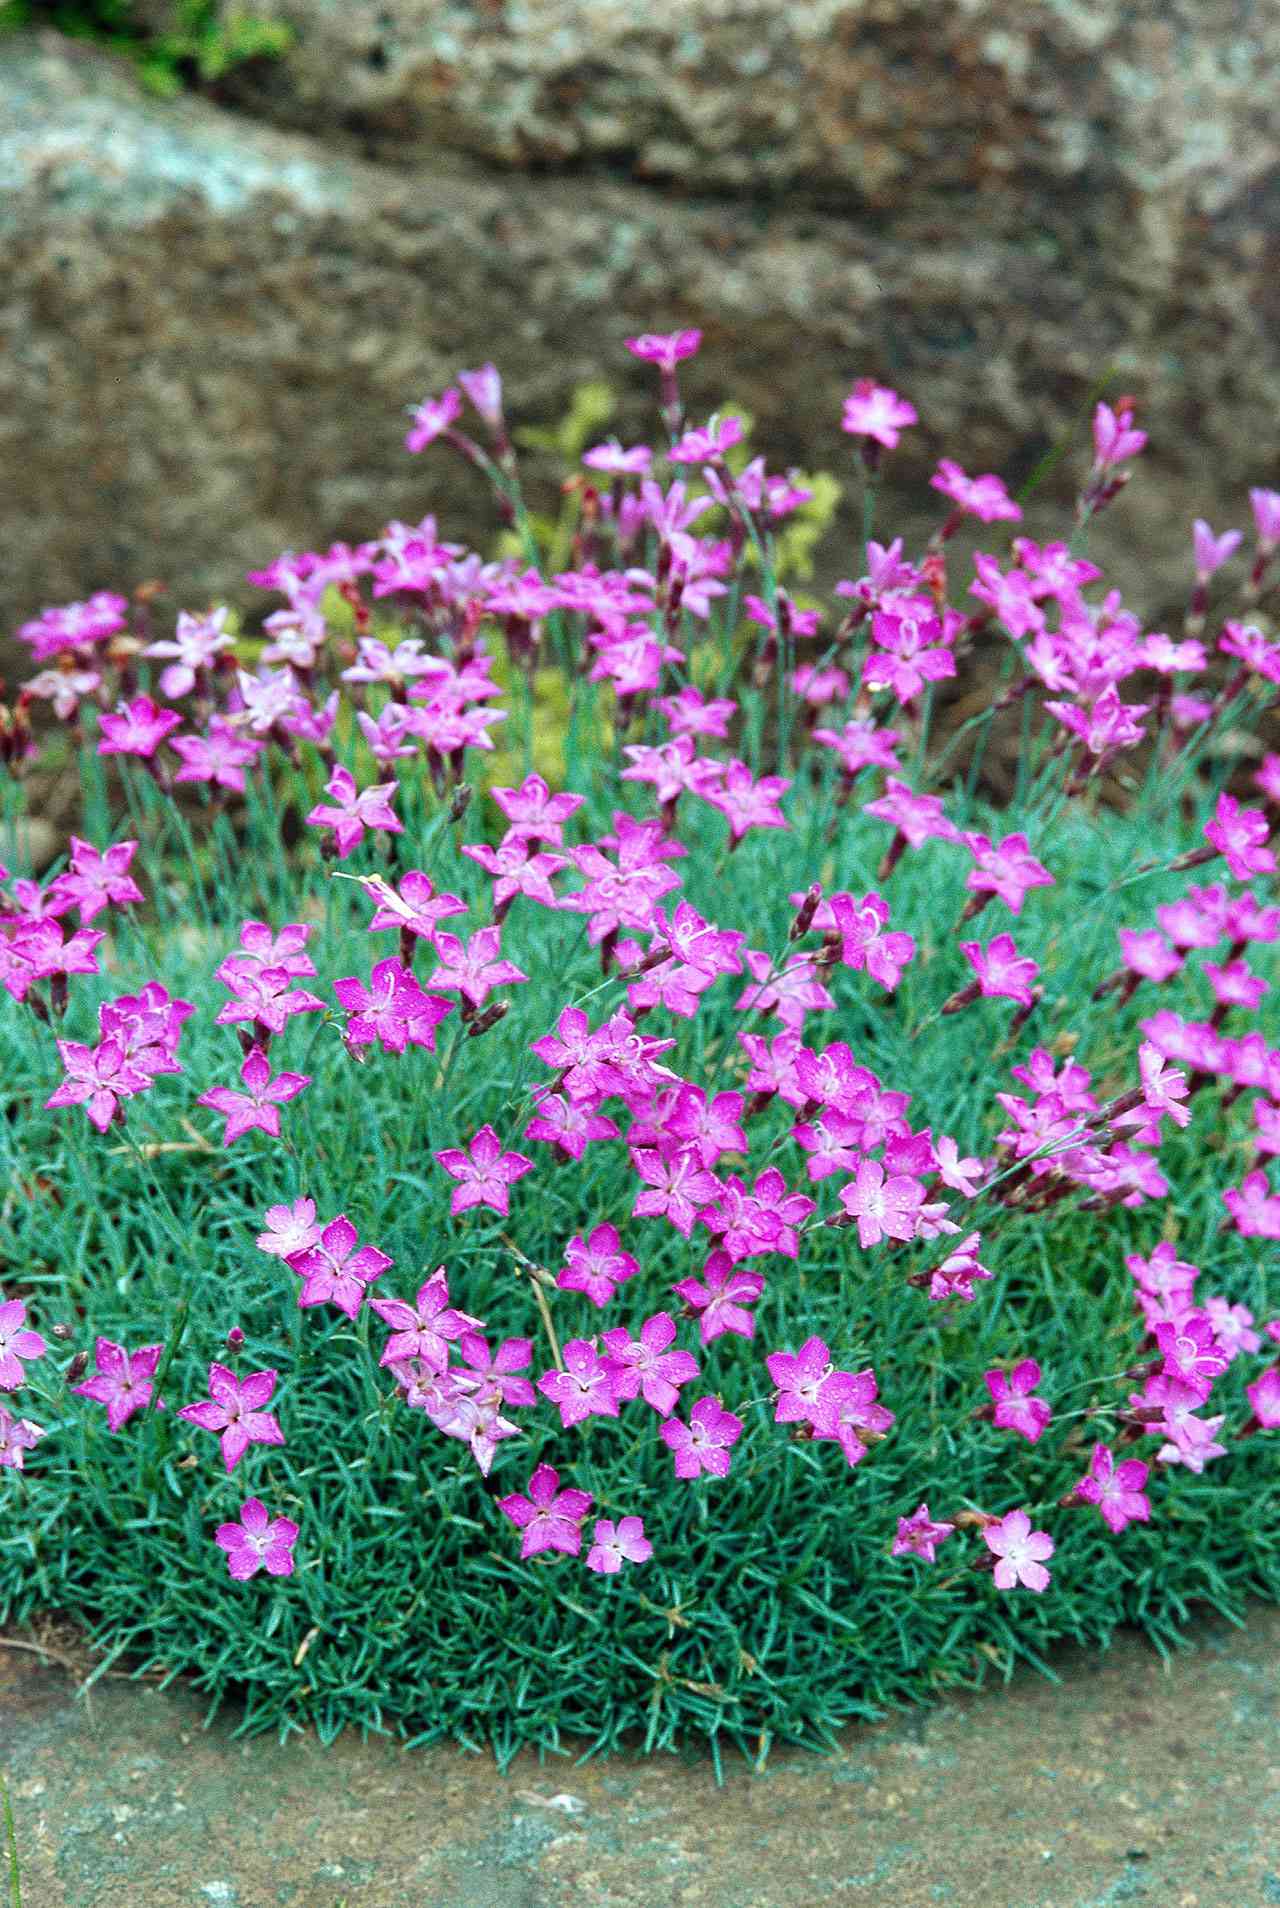 Drought Tolerant Groundcovers Better, What Are The Best Ground Covering Plants